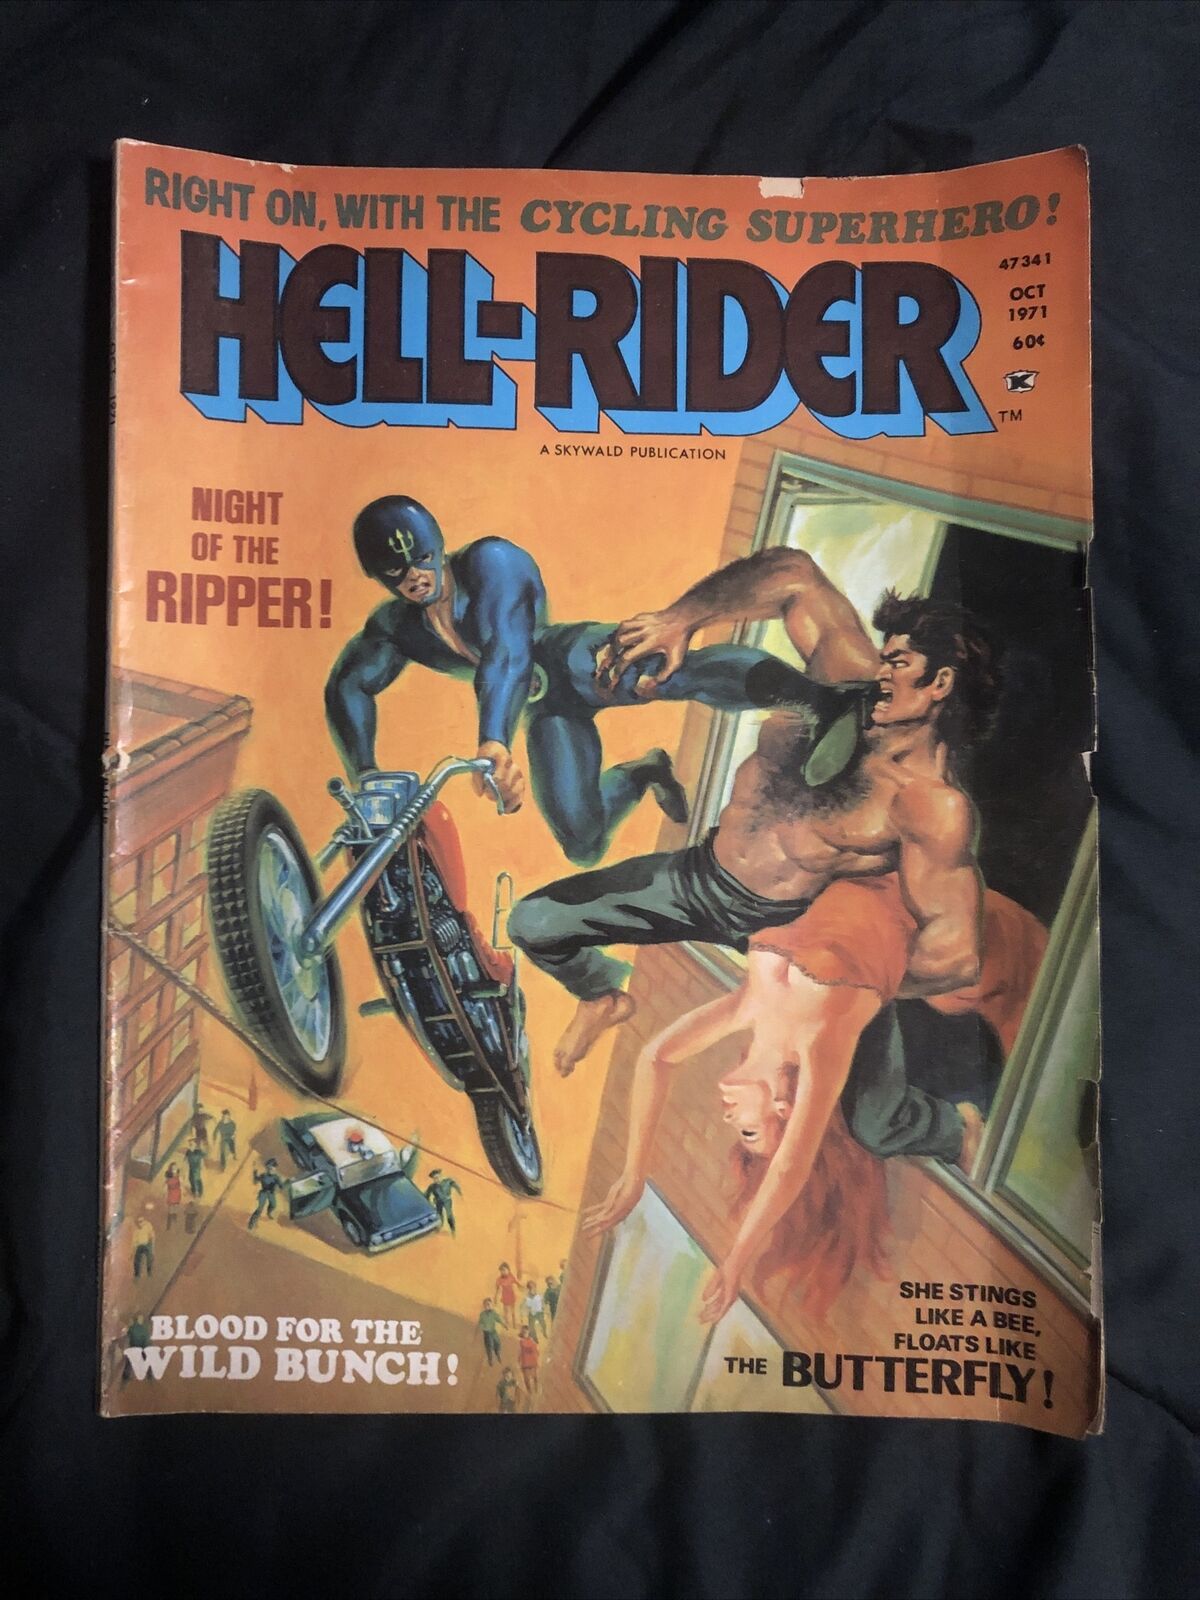 HELL-RIDER #2 - October 1971 - SKYWALD (NEW YORK) - Acceptable